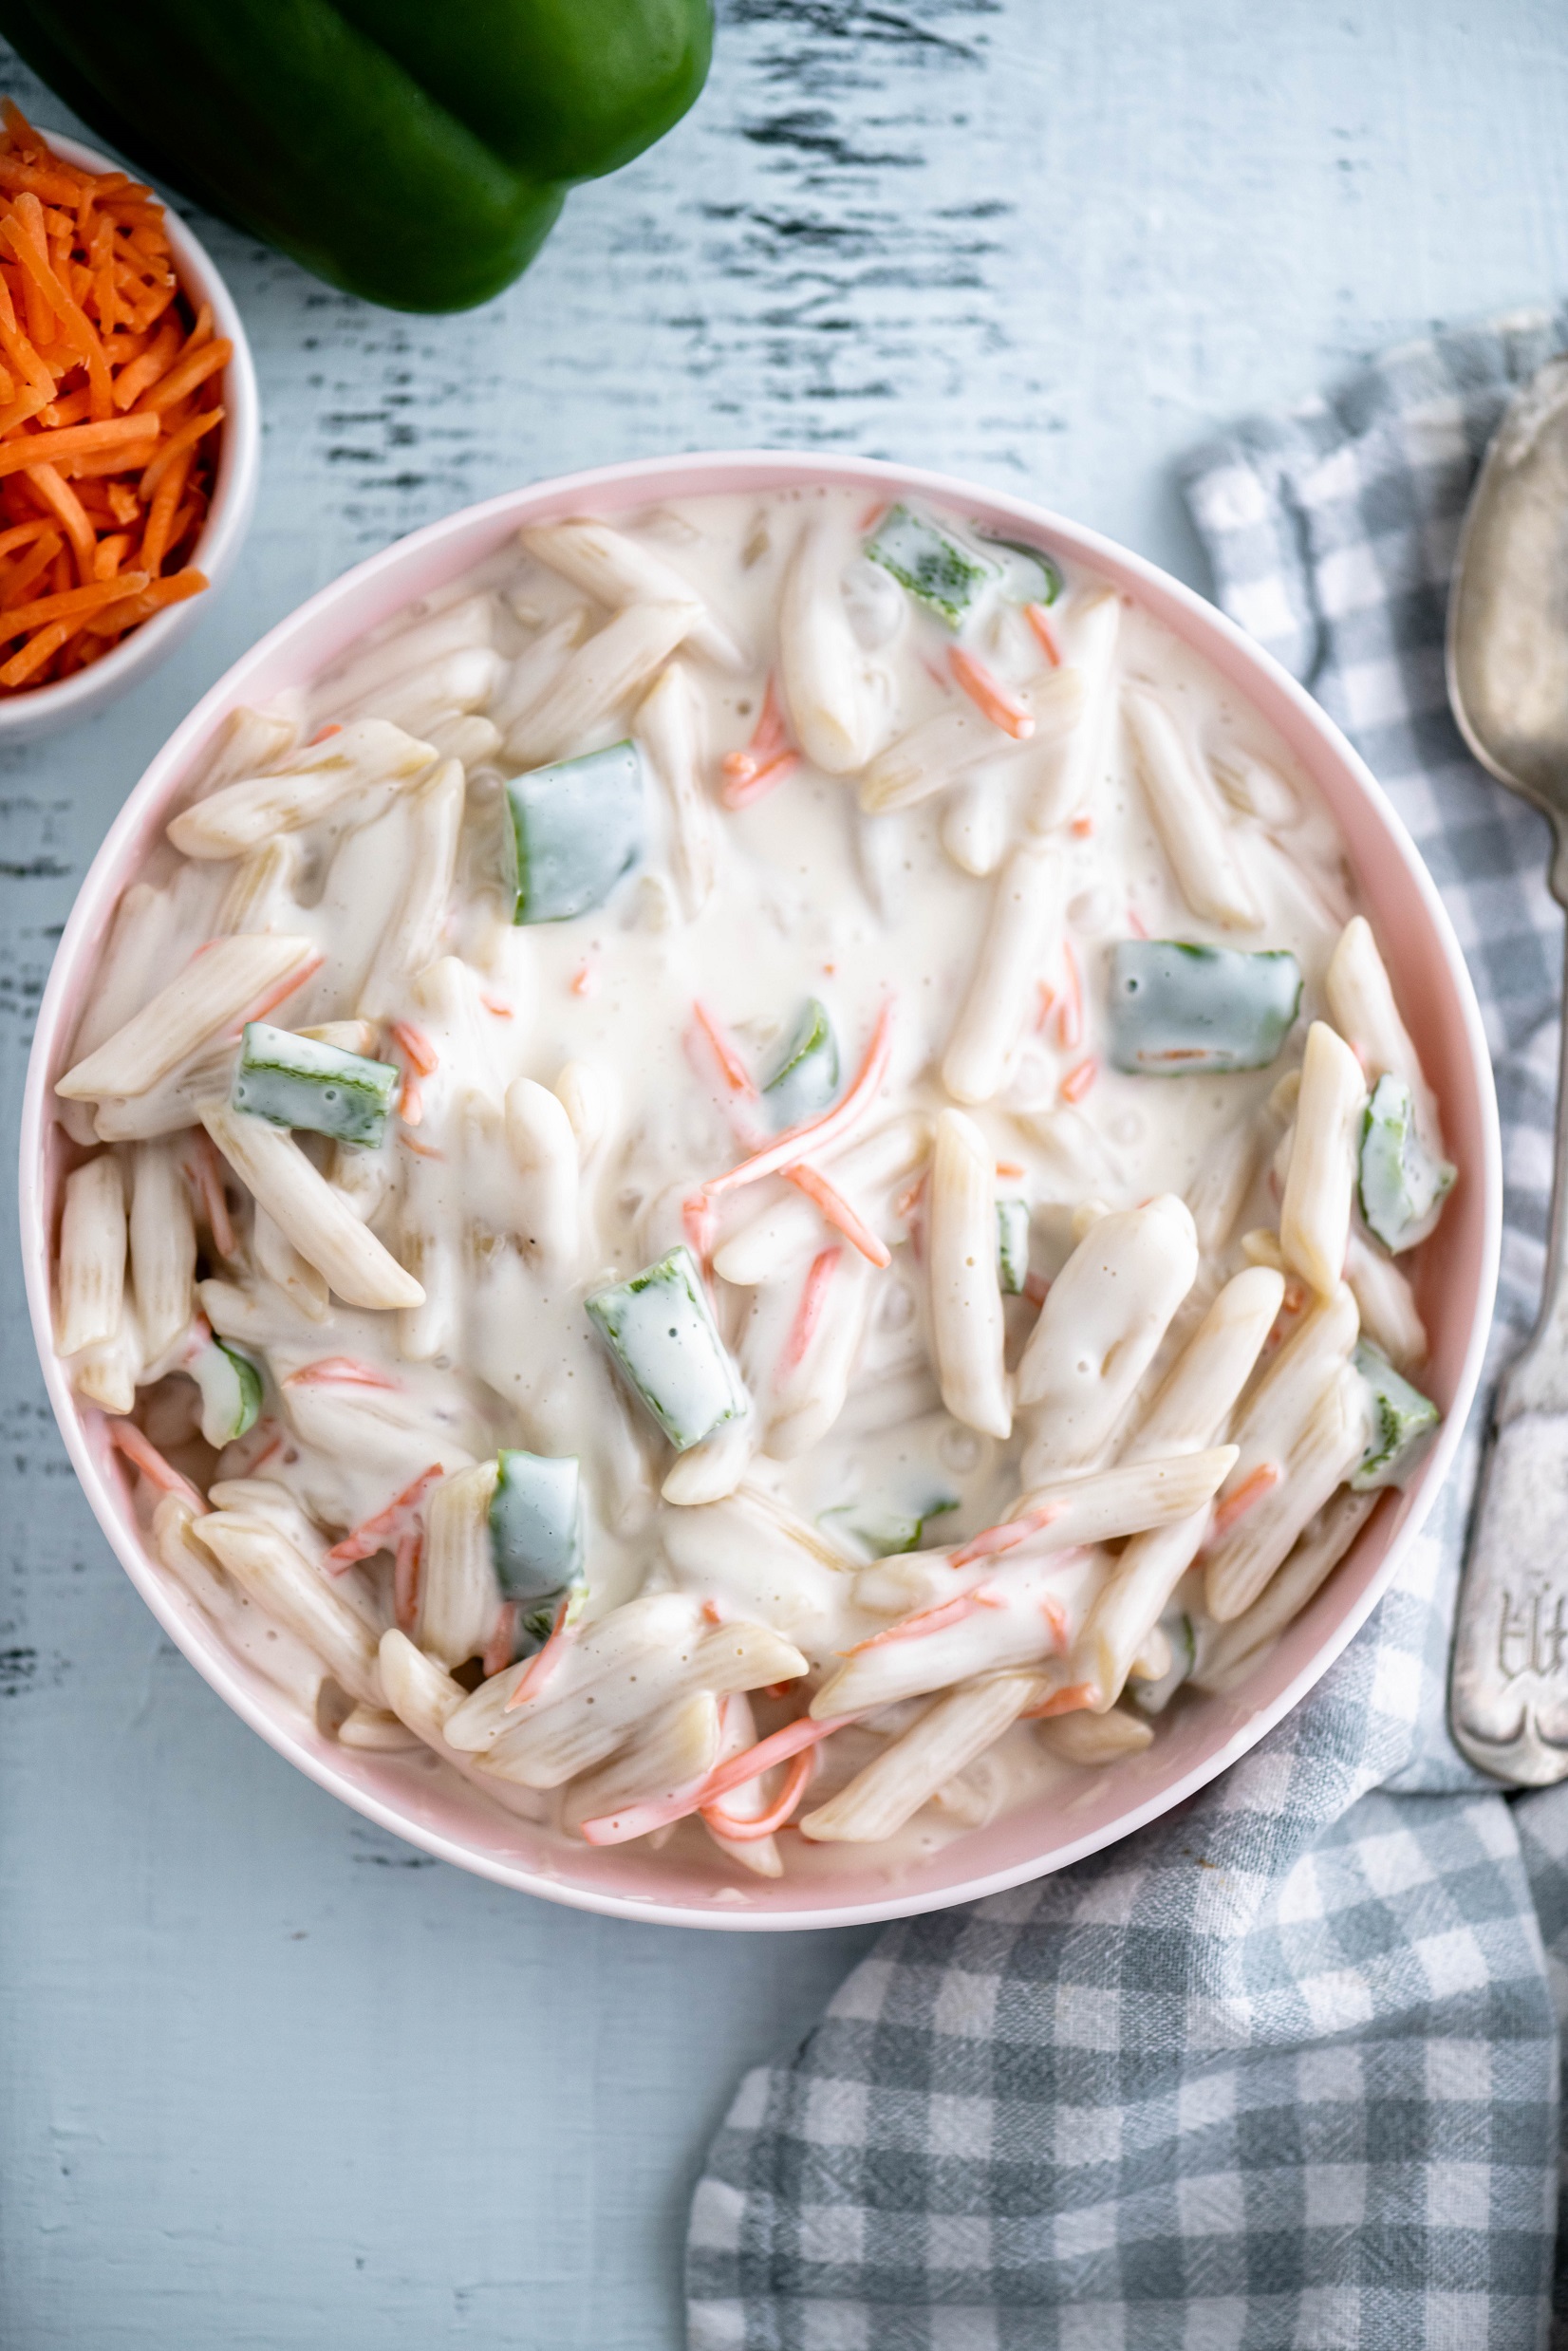 This unique Sweet Macaroni Salad will be a hit at your next barbecue. Simple ingredients combine to make a sweet and zingy macaroni salad that everyone will adore.